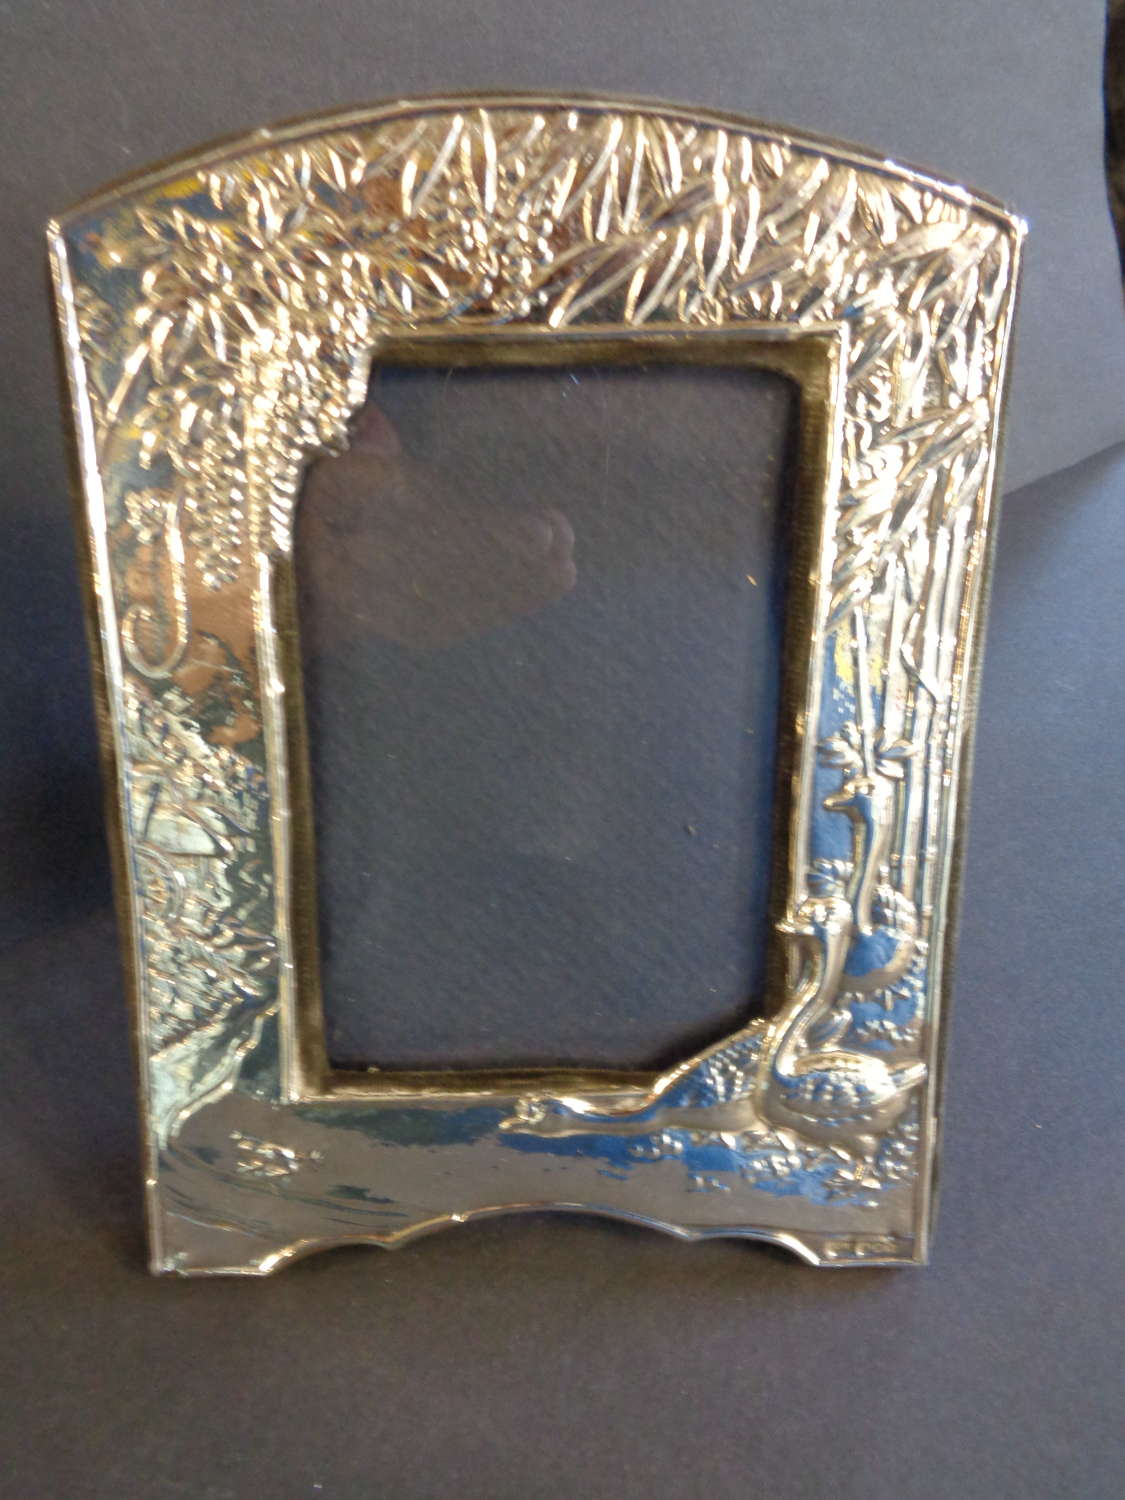 Solid Silver Photo Frame - Decorated with Bamboo - London 1980